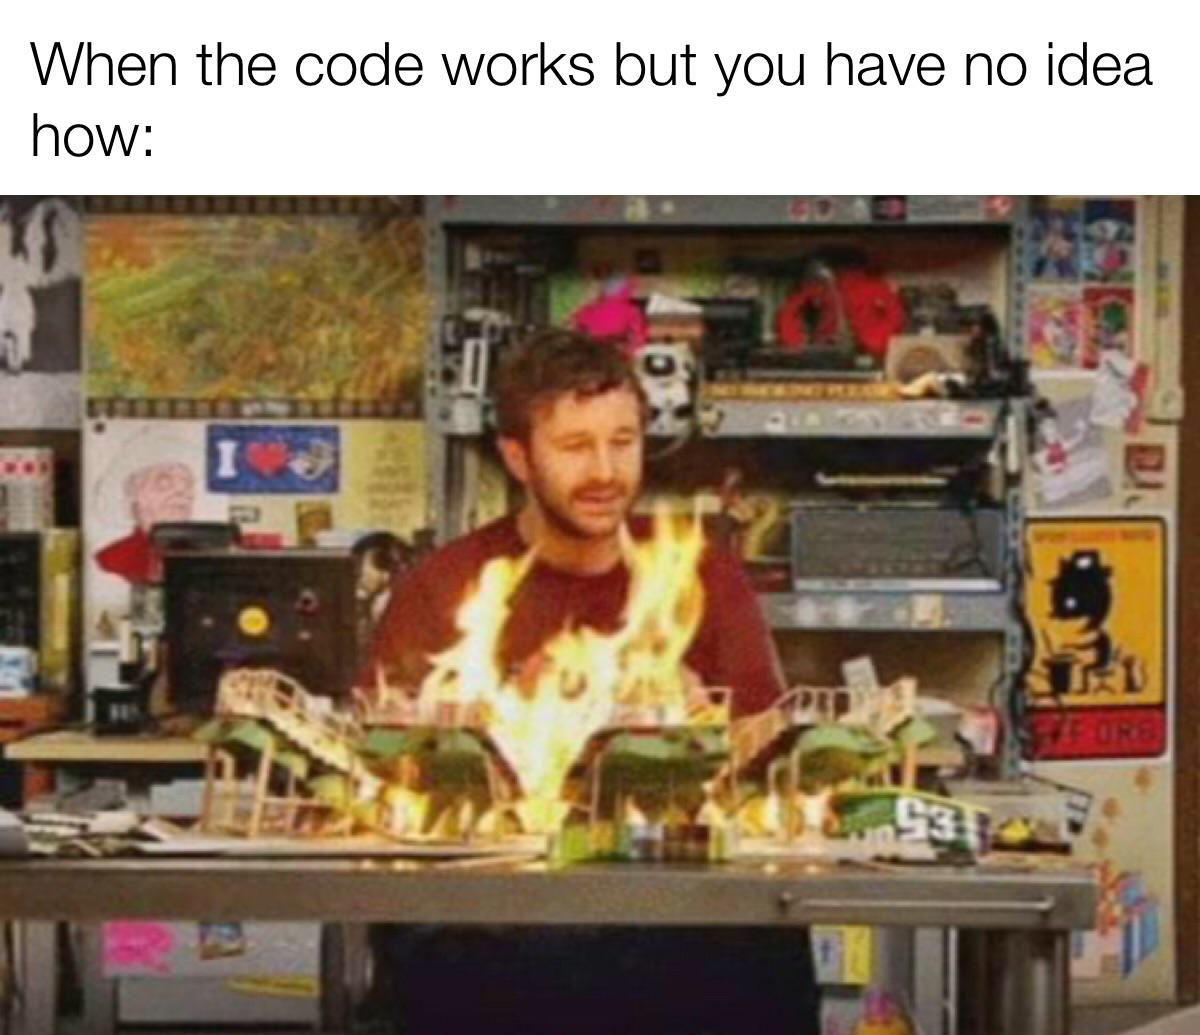 everything is going wrong at work but you re used to it - When the code works but you have no idea how Ore